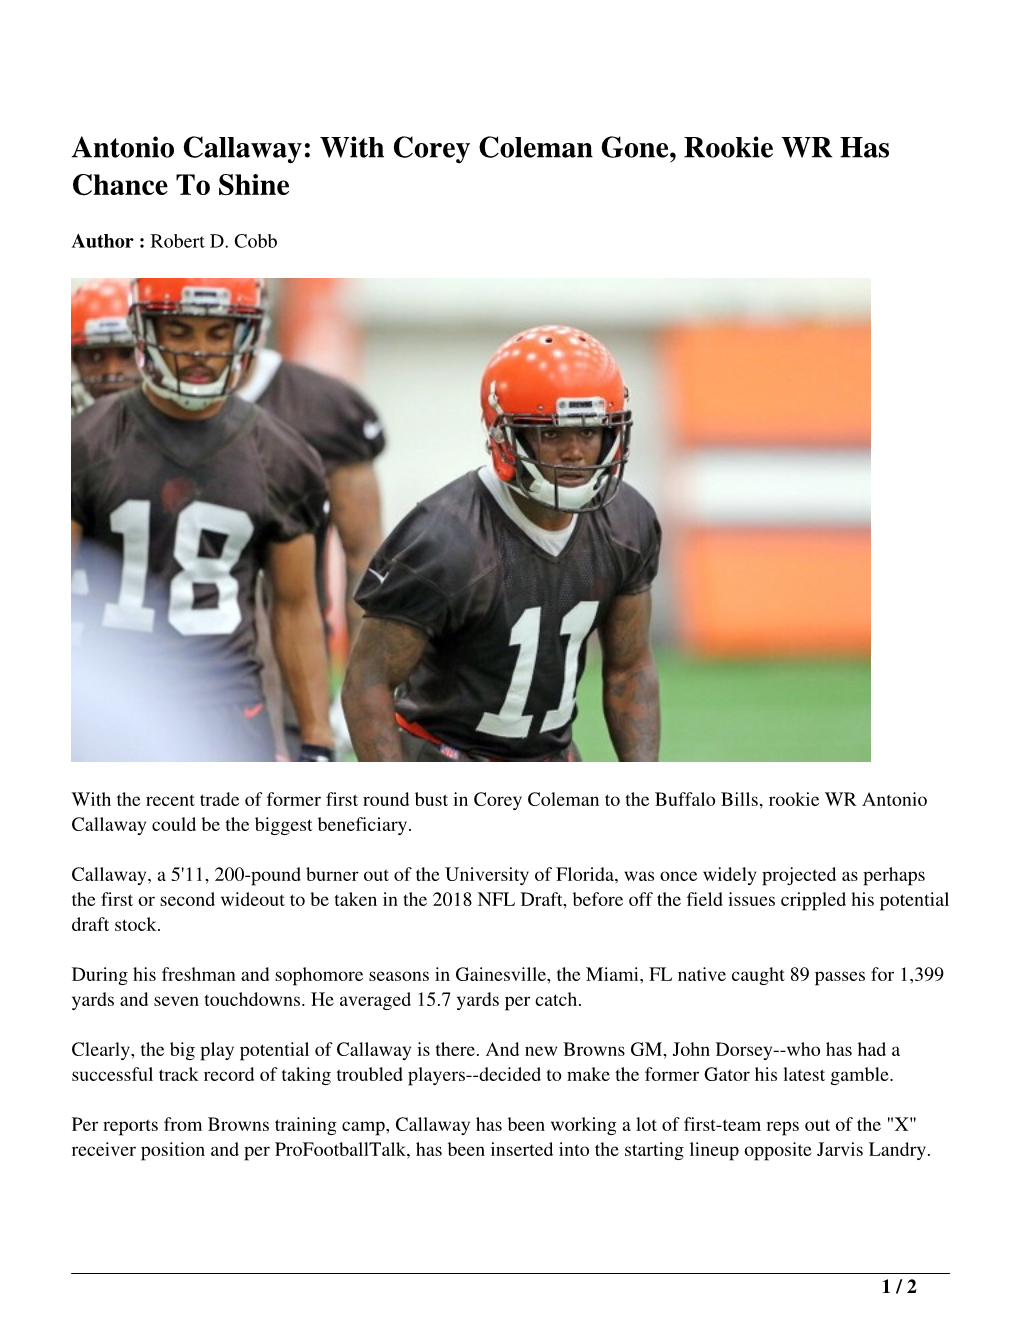 Antonio Callaway: with Corey Coleman Gone, Rookie WR Has Chance to Shine